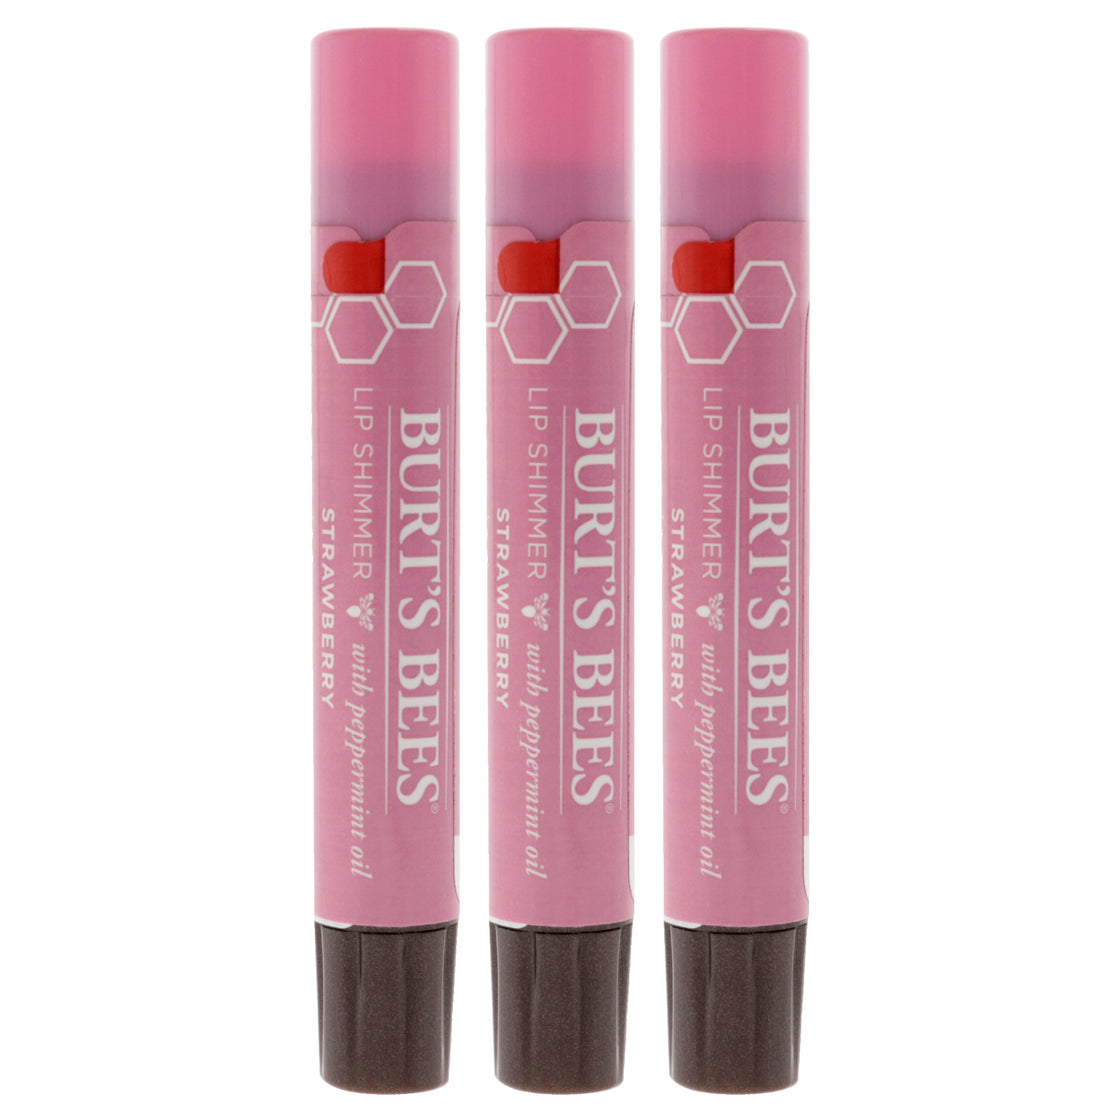 Burts Bees Lip Shimmer - Strawberry by Burts Bees for Women - 0.09 oz Lip Shimmer - Pack of 3